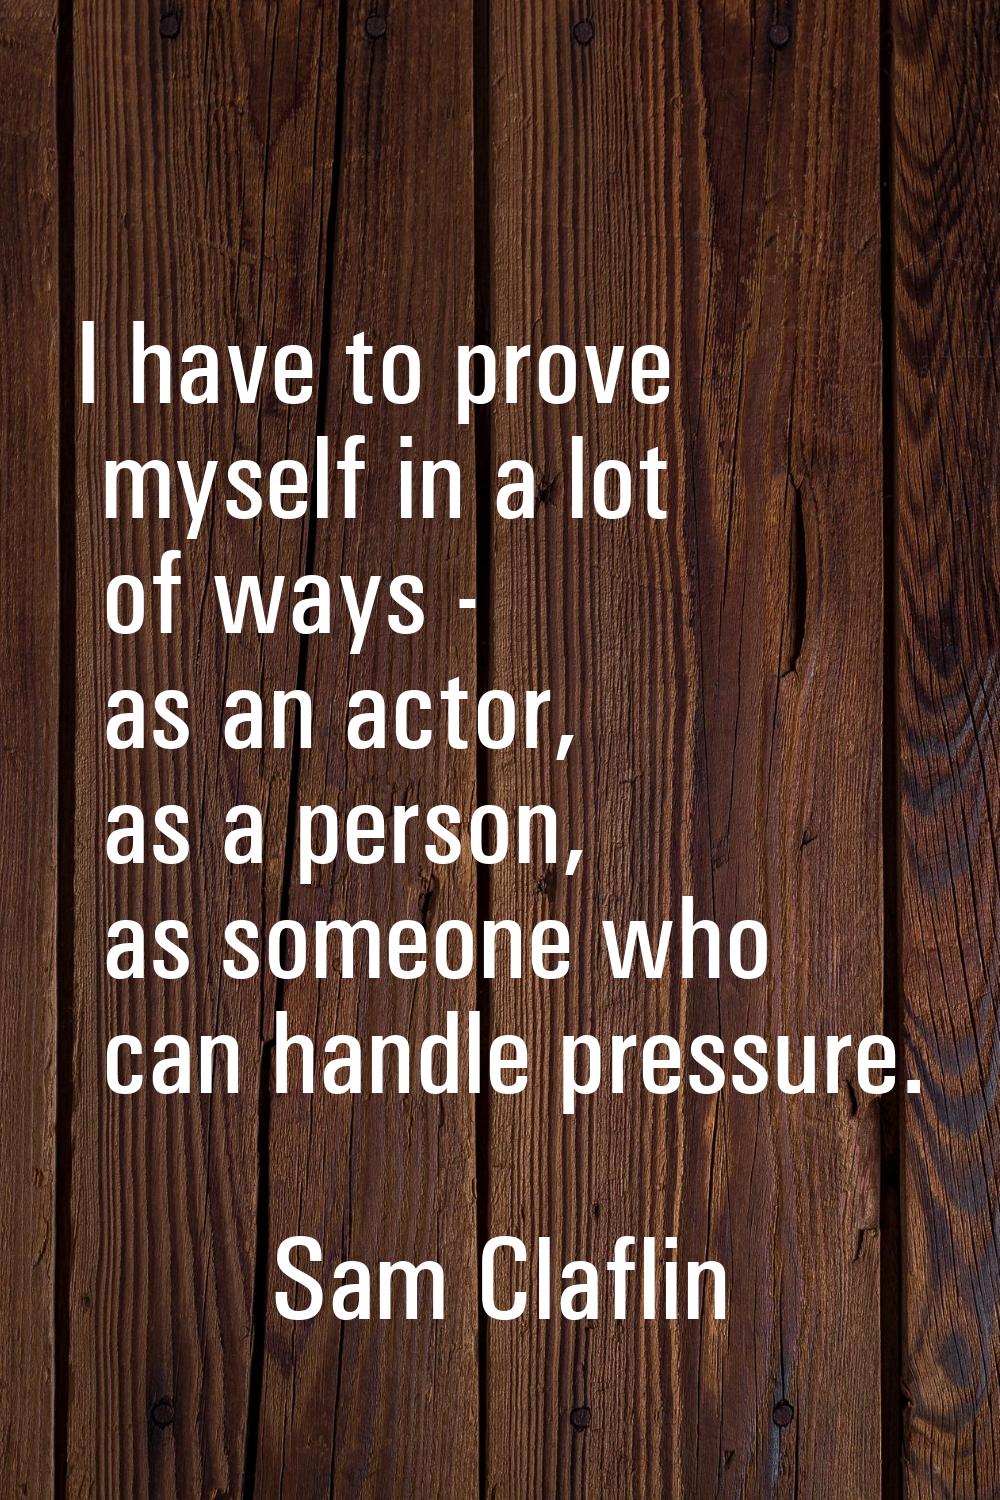 I have to prove myself in a lot of ways - as an actor, as a person, as someone who can handle press